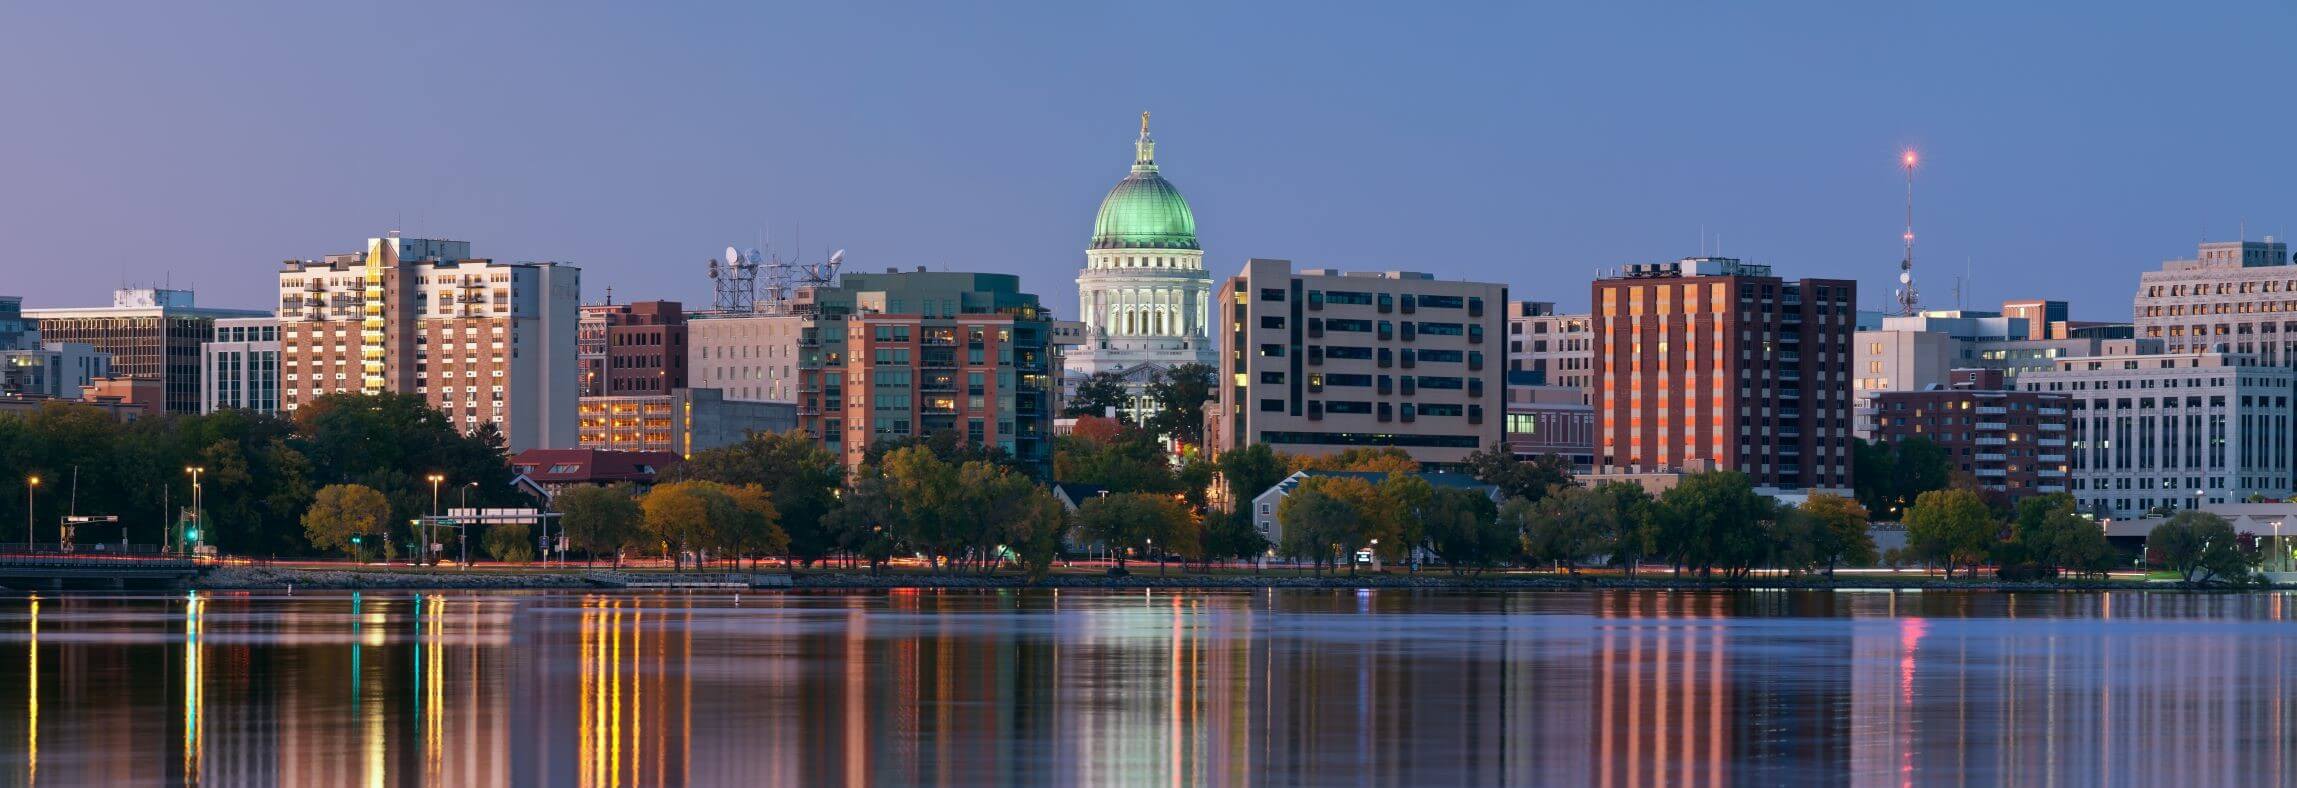 Madison with a lake and tall office buildings